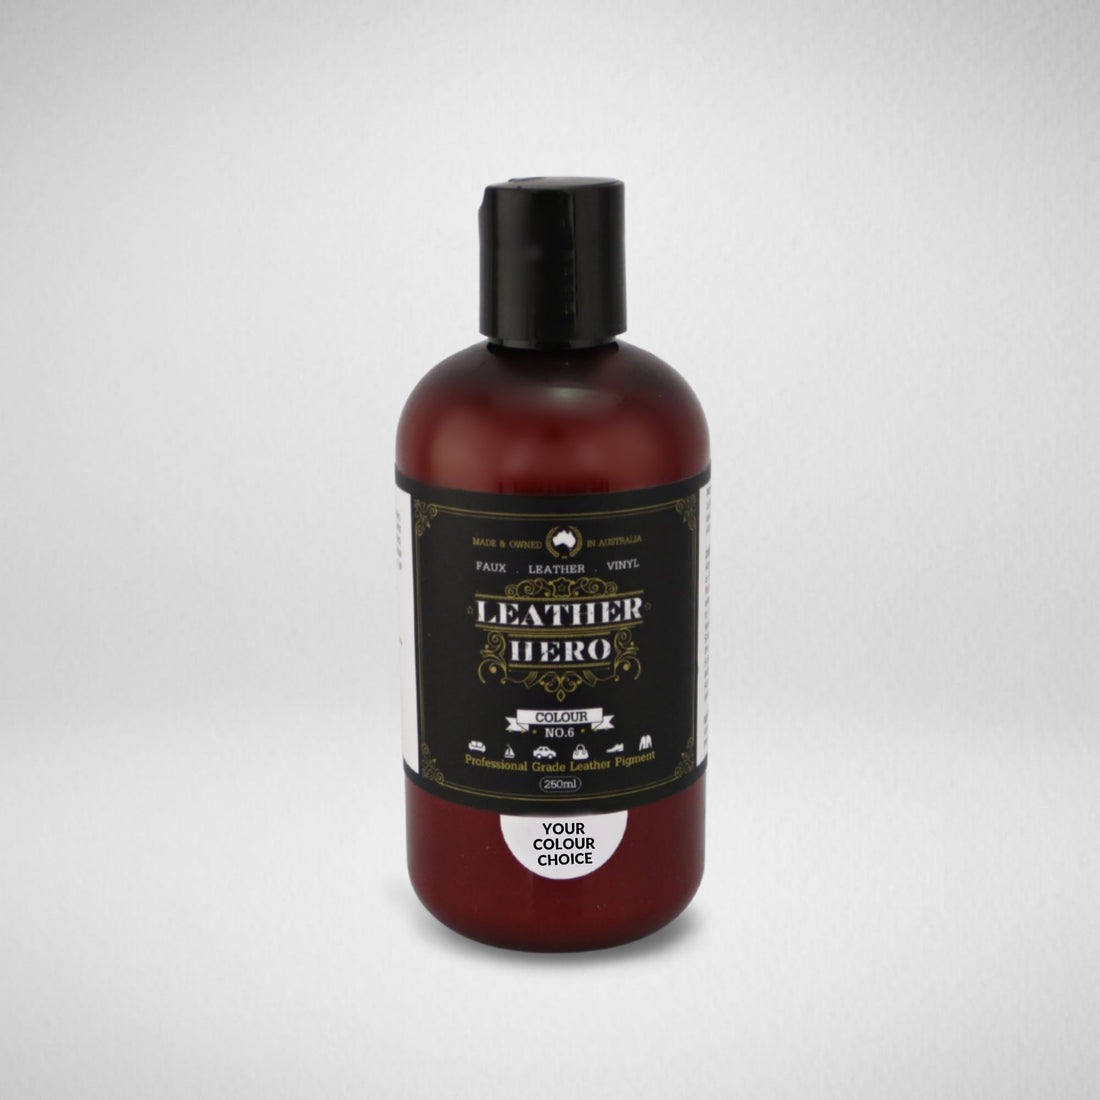 Leather Paint - Pinot Leather Repair & Recolouring Leather Hero Australia